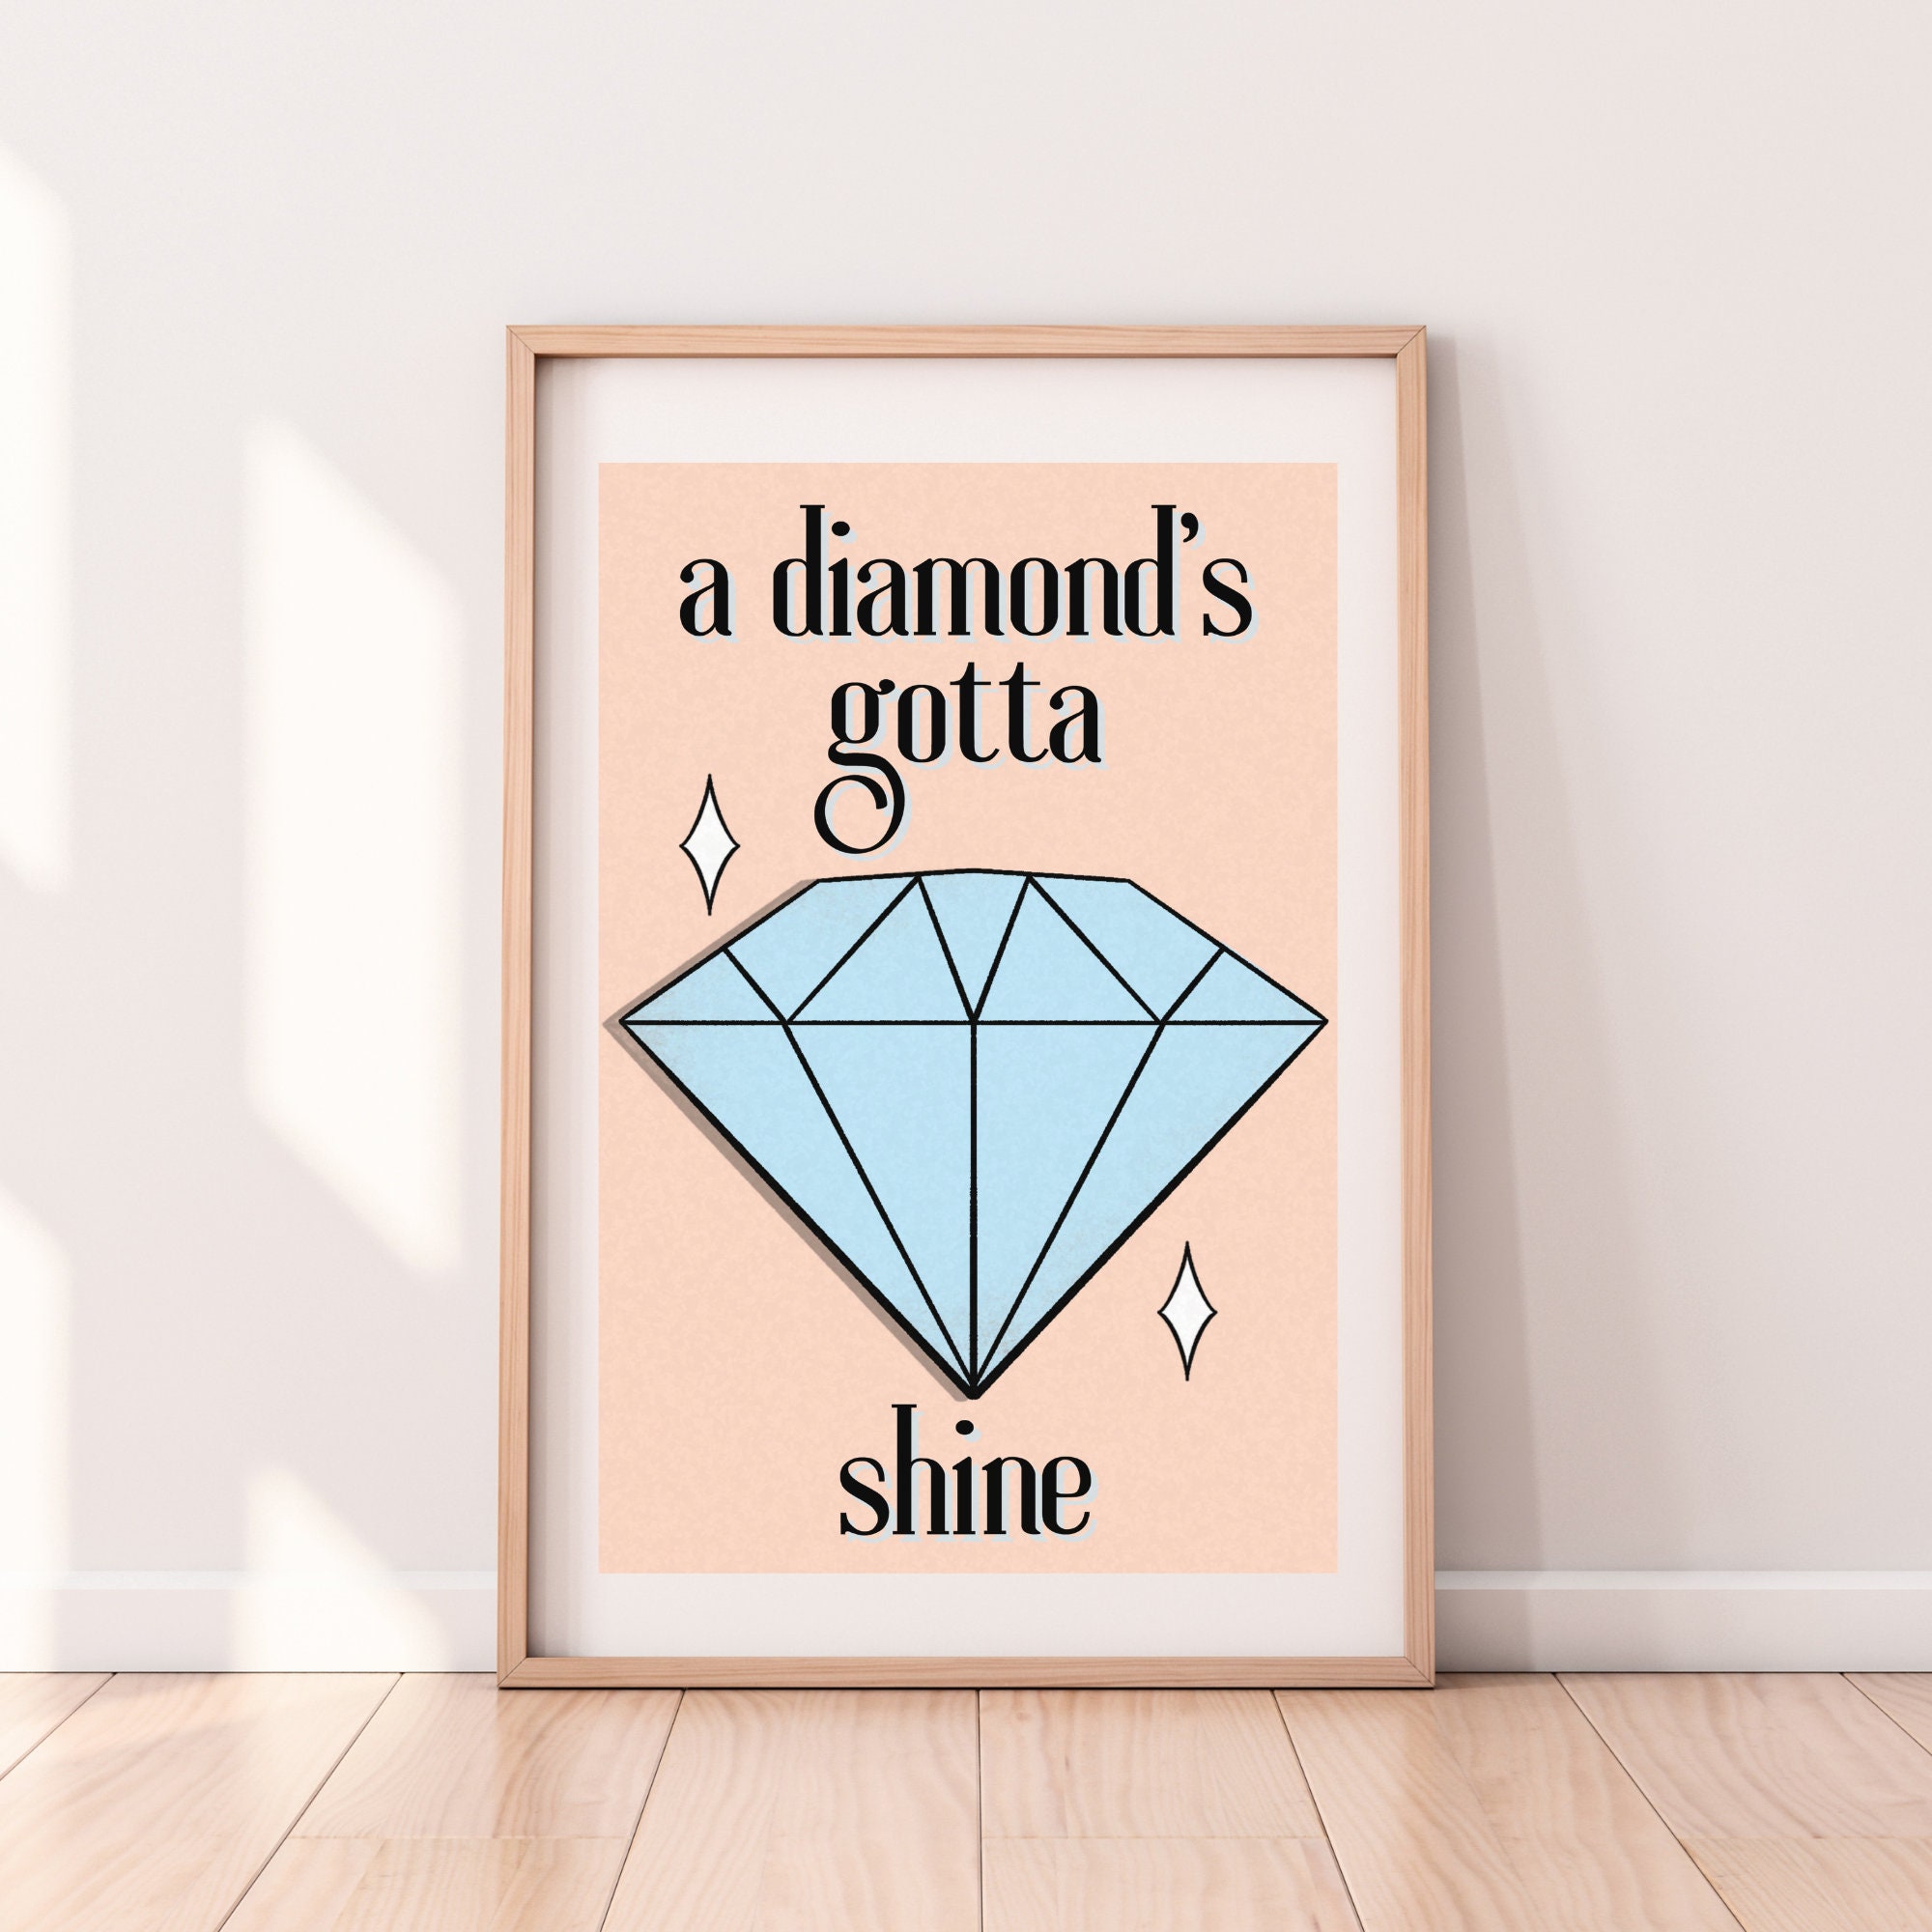 what's a girl gonna do a diamond's gotta shine (sparkle) - Taylor Swift  Art Board Print for Sale by stainedauroras